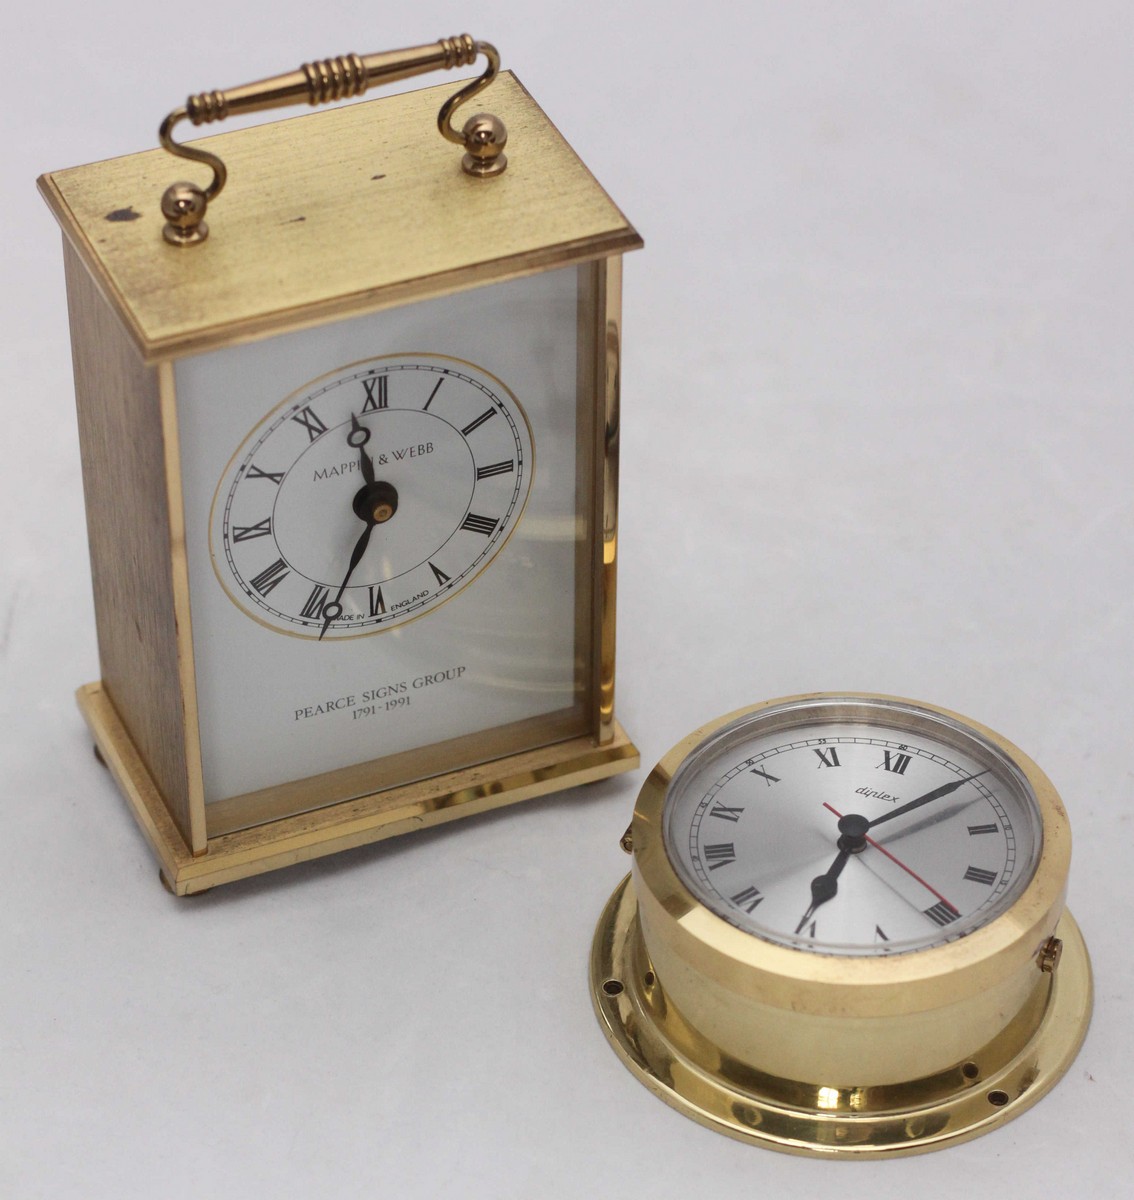 A Mappin & Webb quartz mantel clock, engraved to the reverse and also marked 'Pearce Signs Group